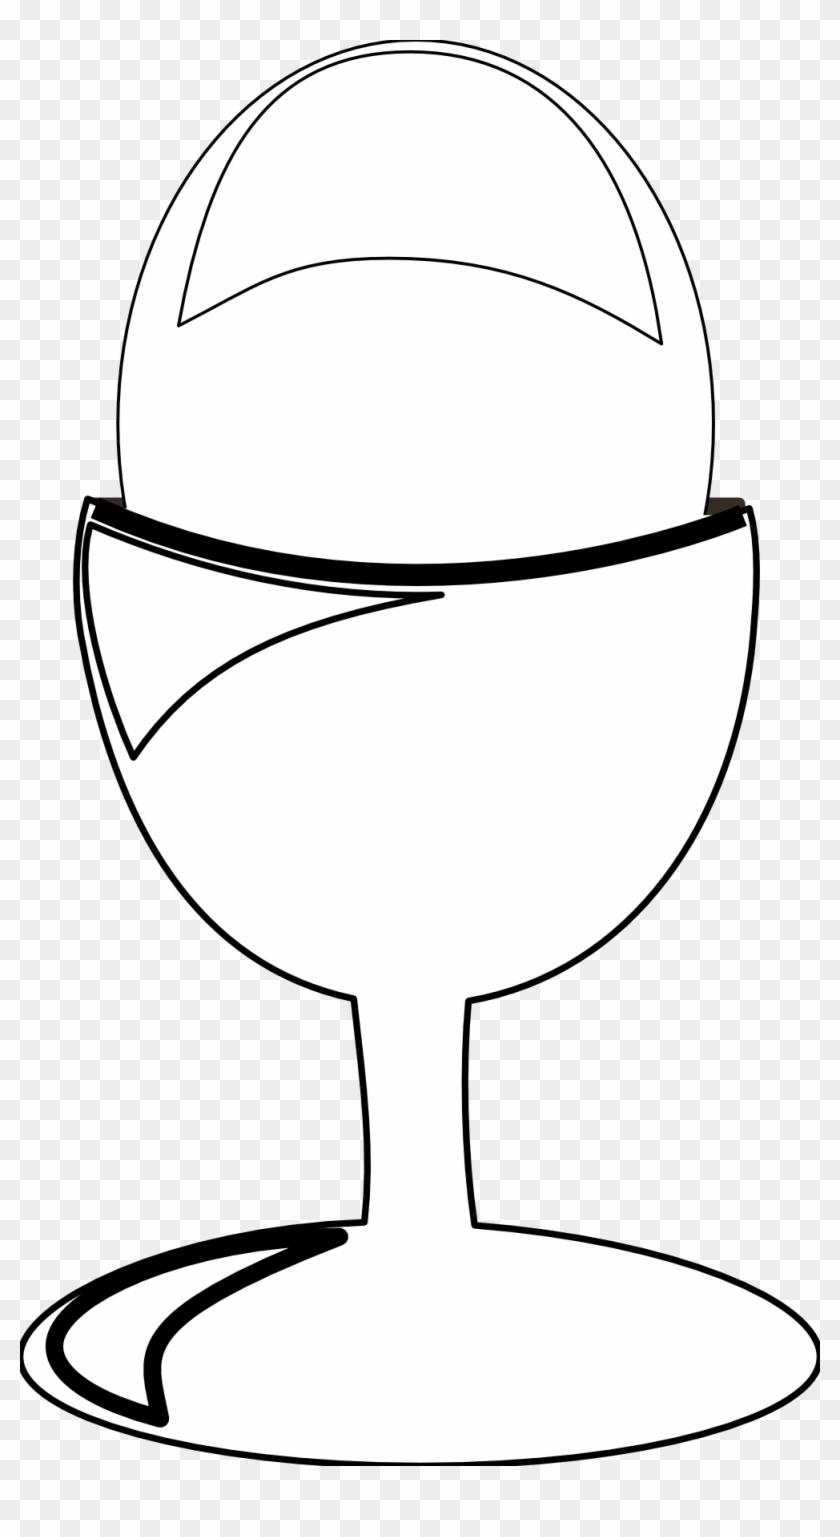 Line Art Black And White Coloring Book Clip Art - Egg Cup #358740